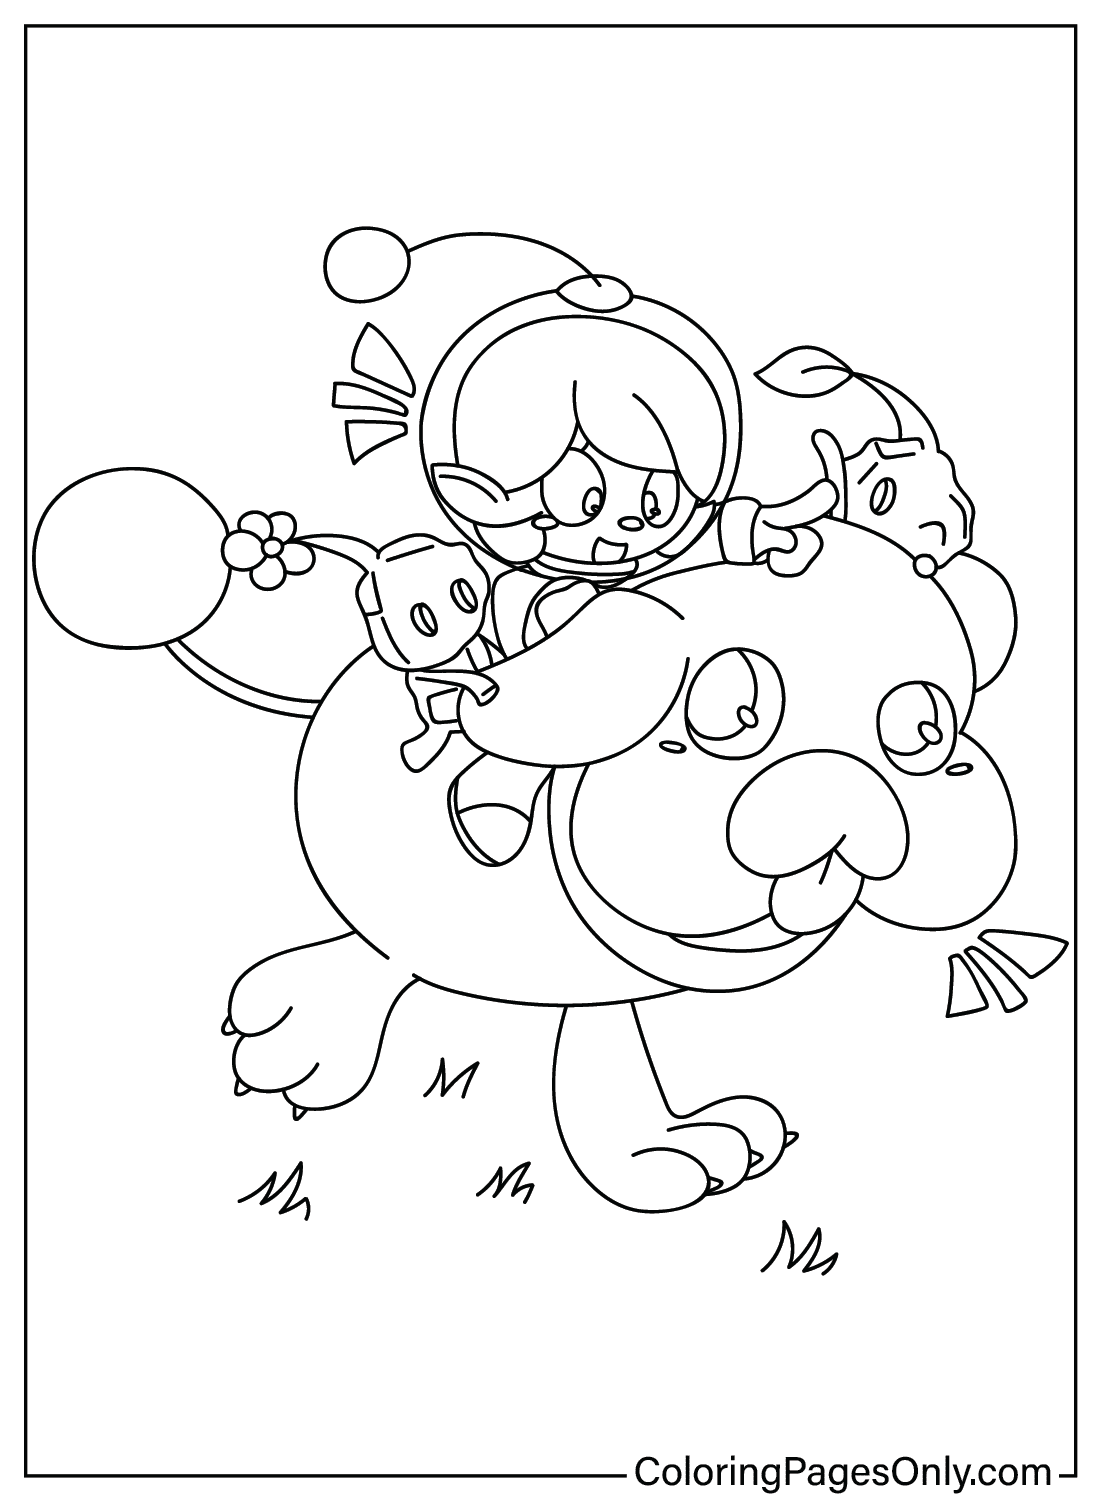 Pikmin Coloring Page PDF from Pikmin